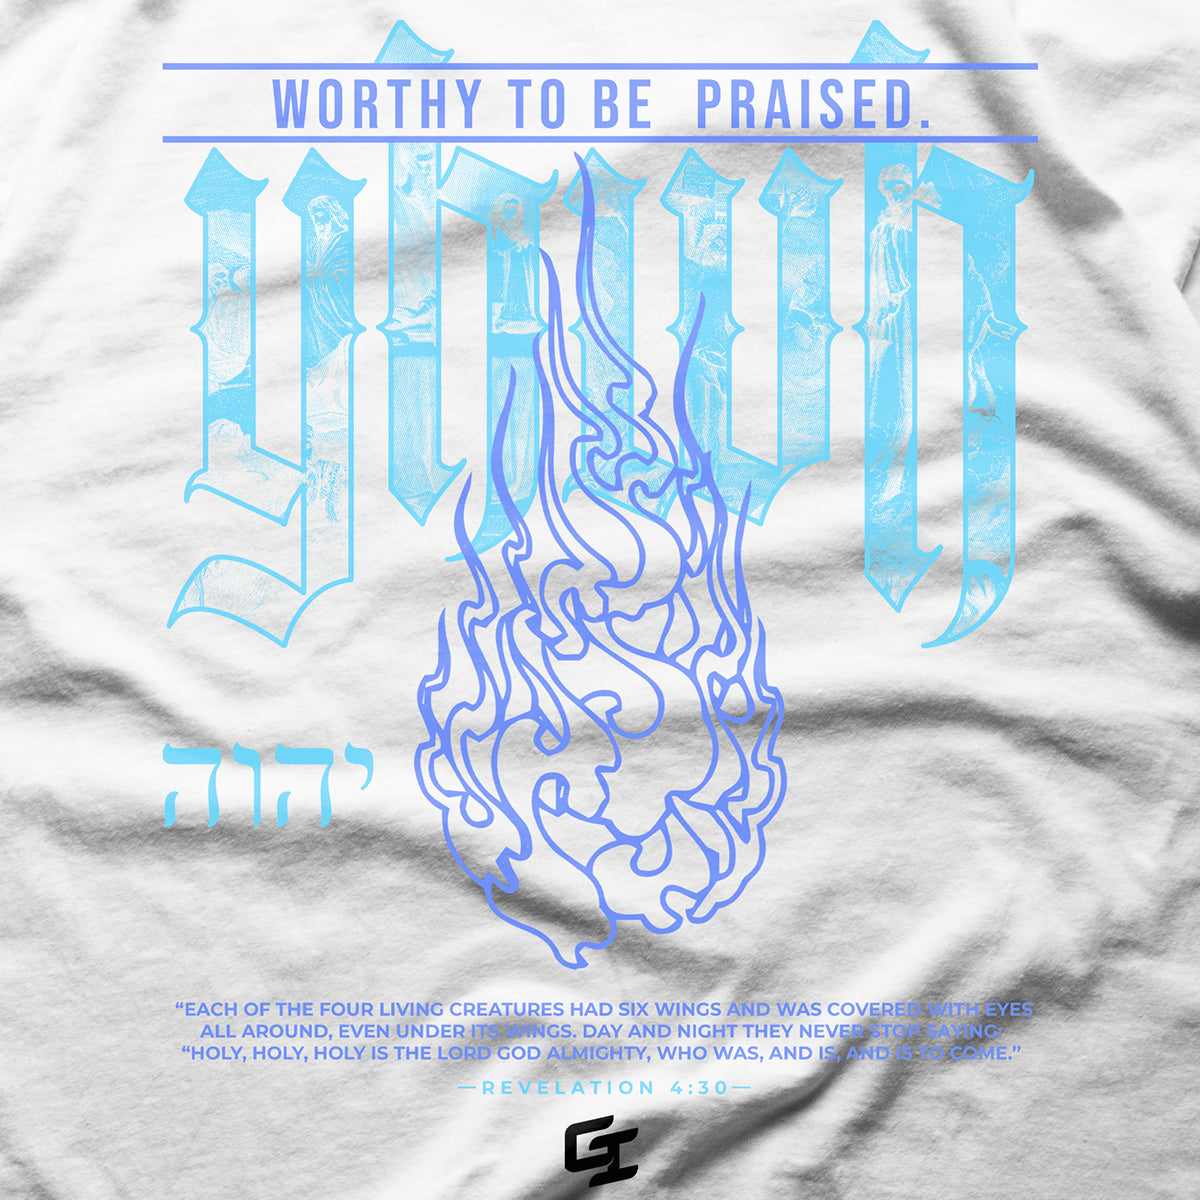 [Limited Edition] Prevailer 'Yahweh' T-Shirt